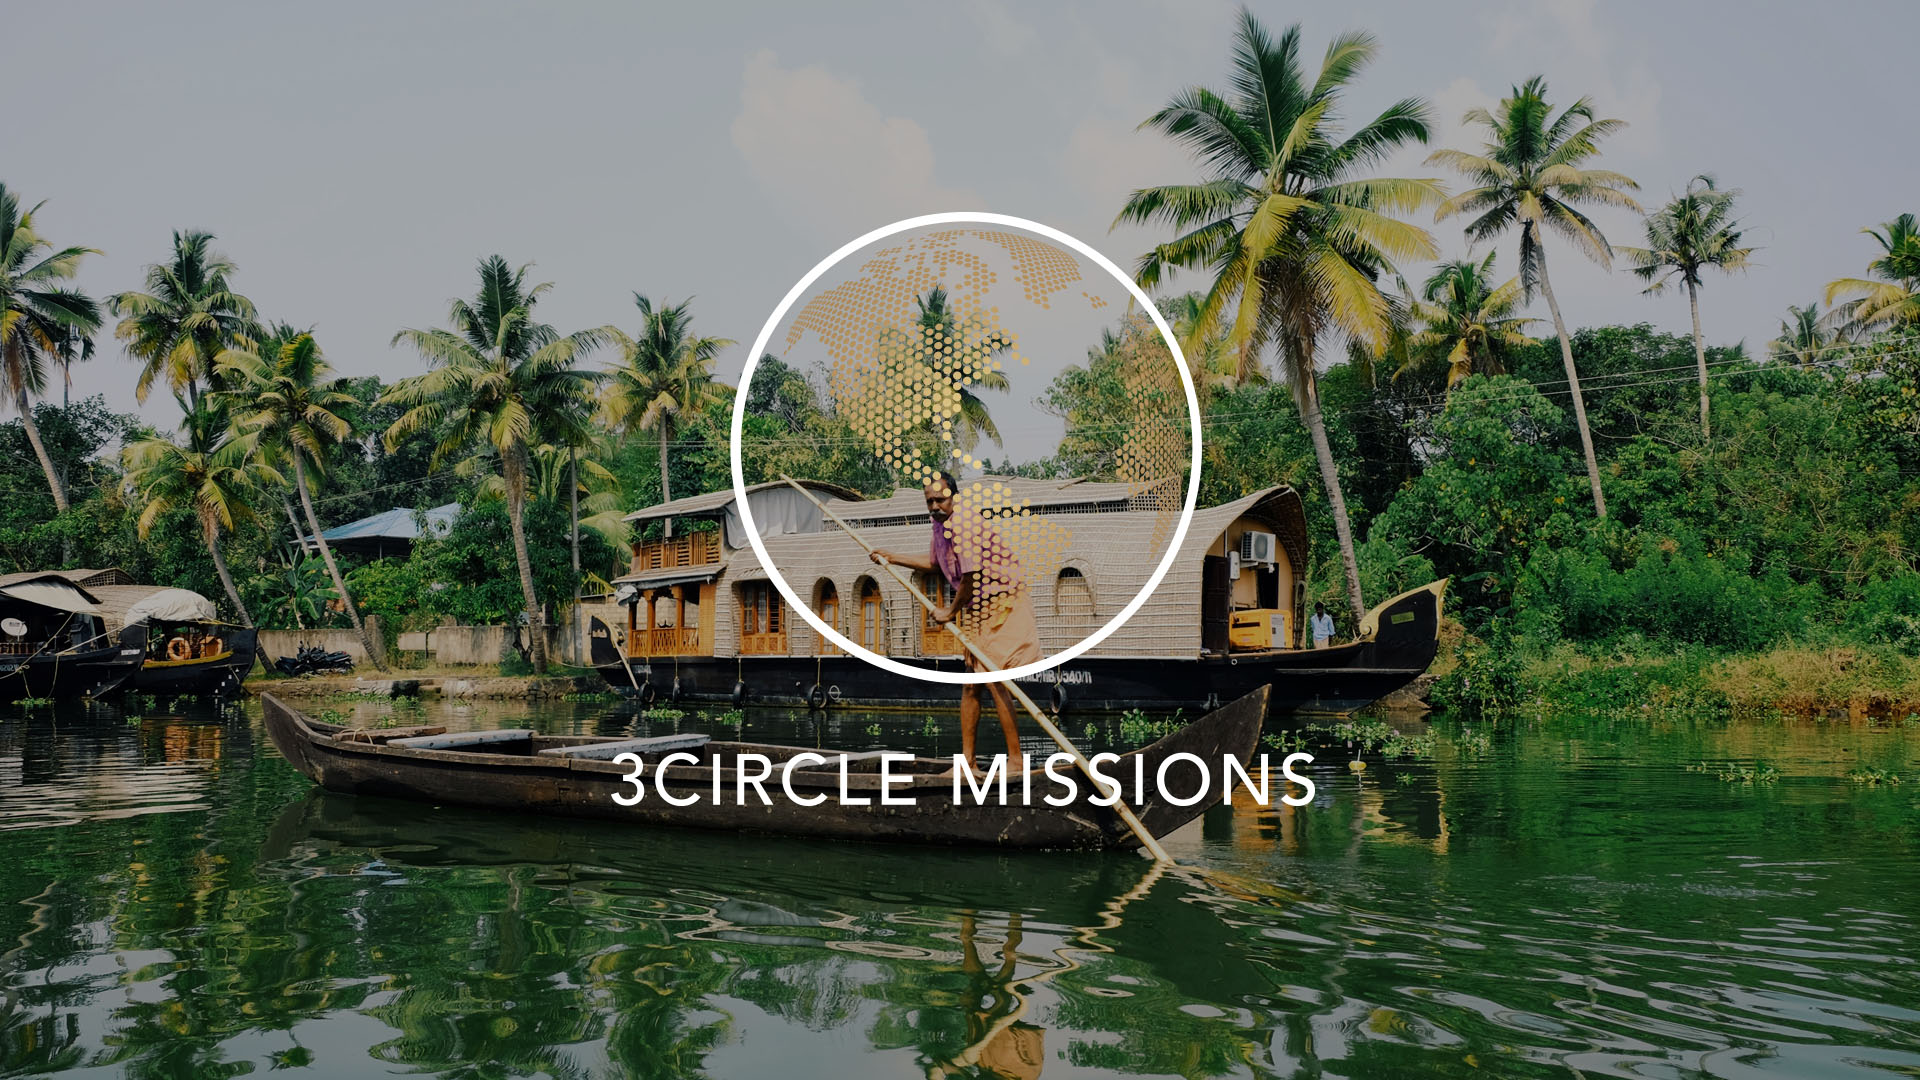 India Missions